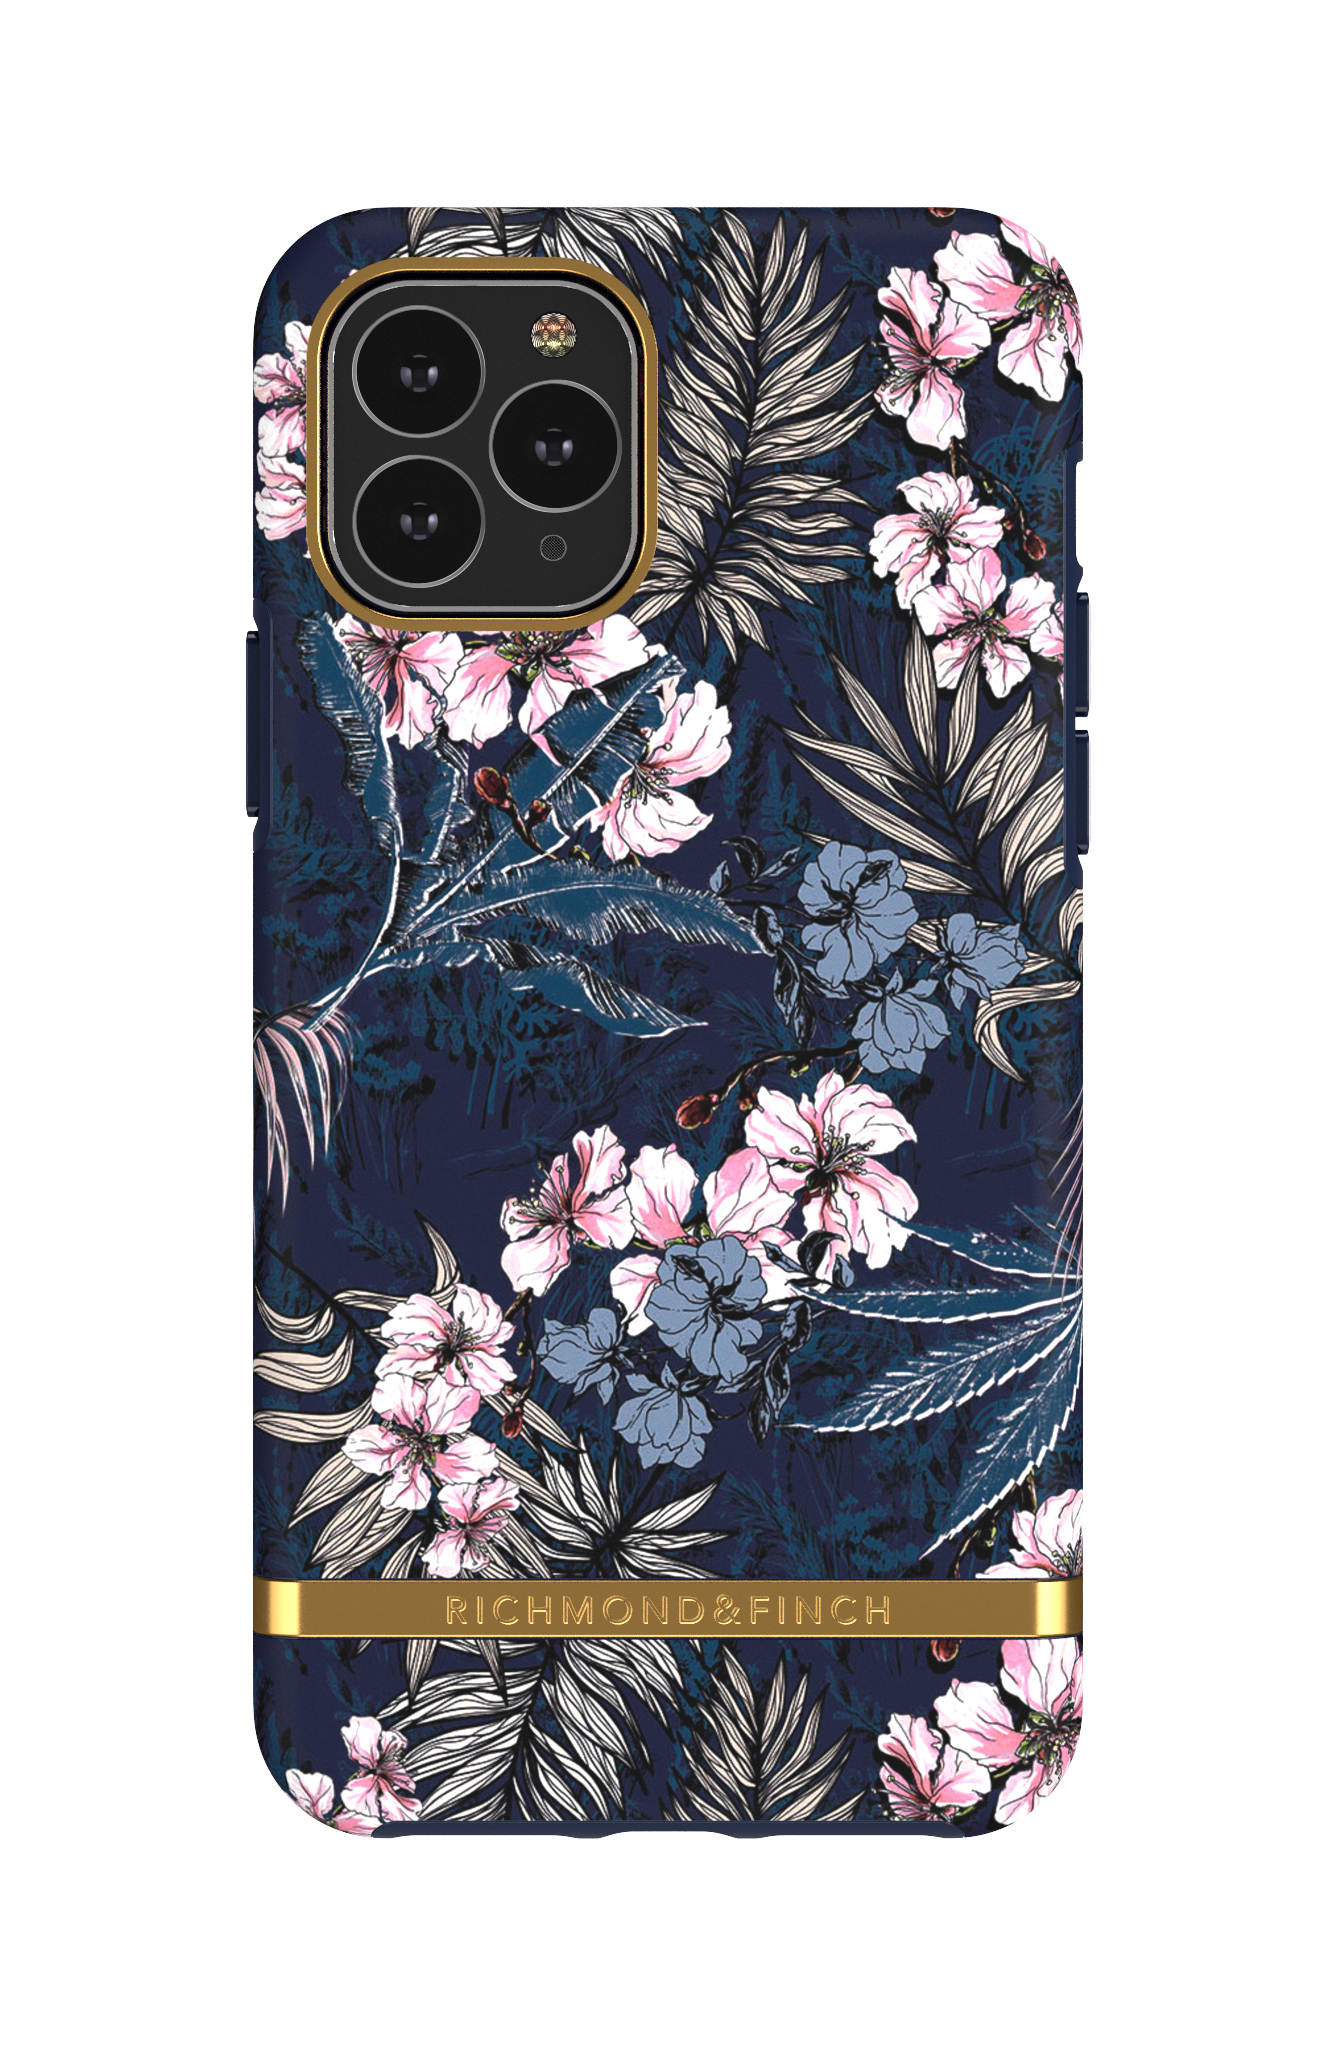 iPhone Pro 11 Max, Floral & PRO 11 GOLD APPLE, RICHMOND Jungle FINCH Backcover, MAX, IPHONE